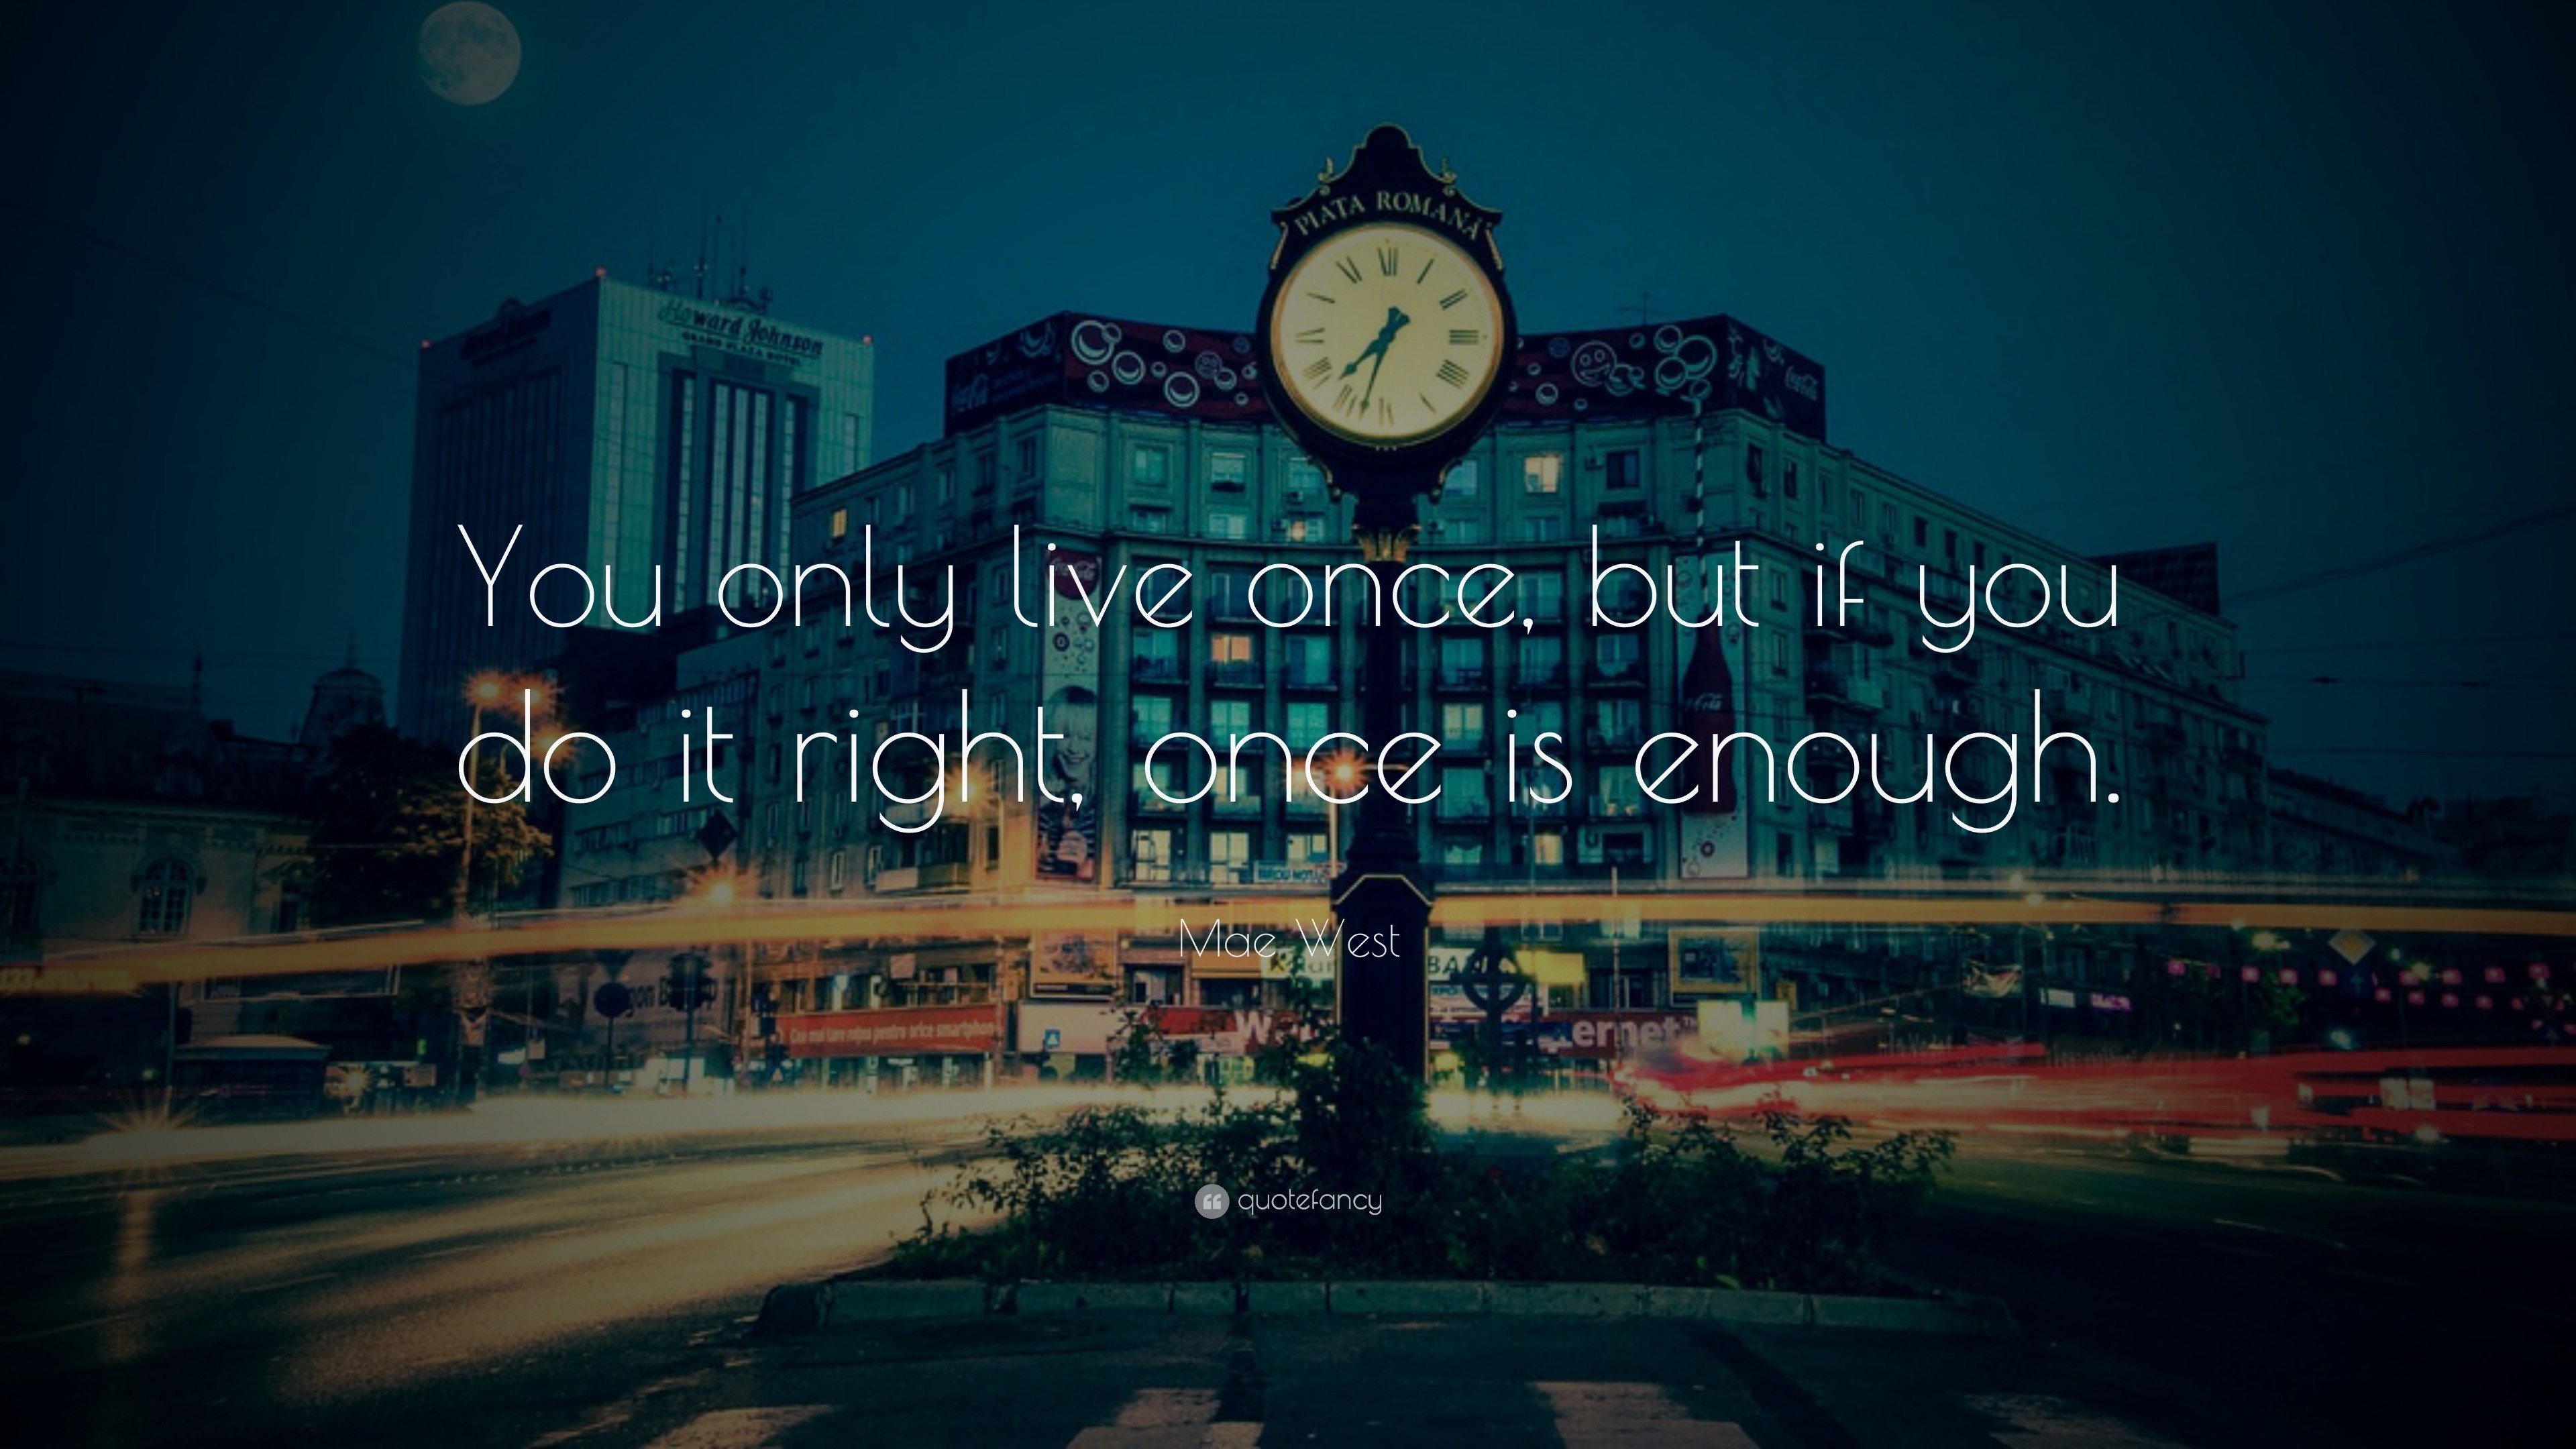 Mae West Quote: “You only live once, but if you do it right, once is